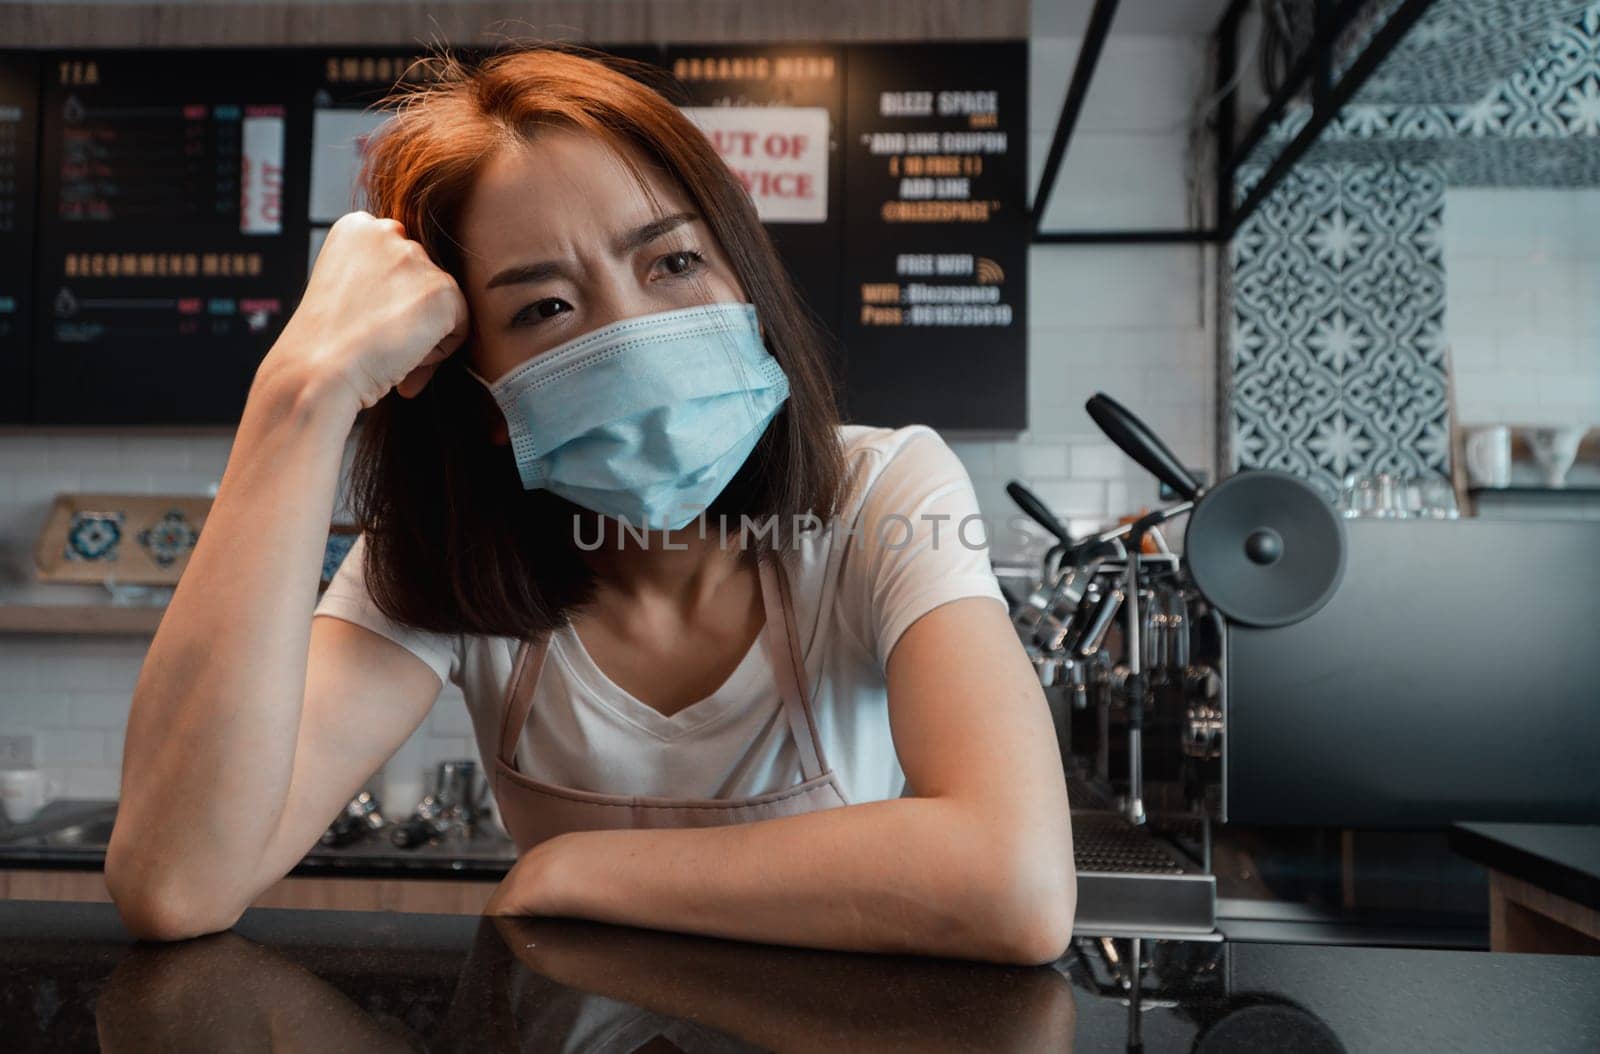 Asian woman coffee shop business owner Stressed and disappointed from The effects of the coronavirus pandemic resulting in business losses